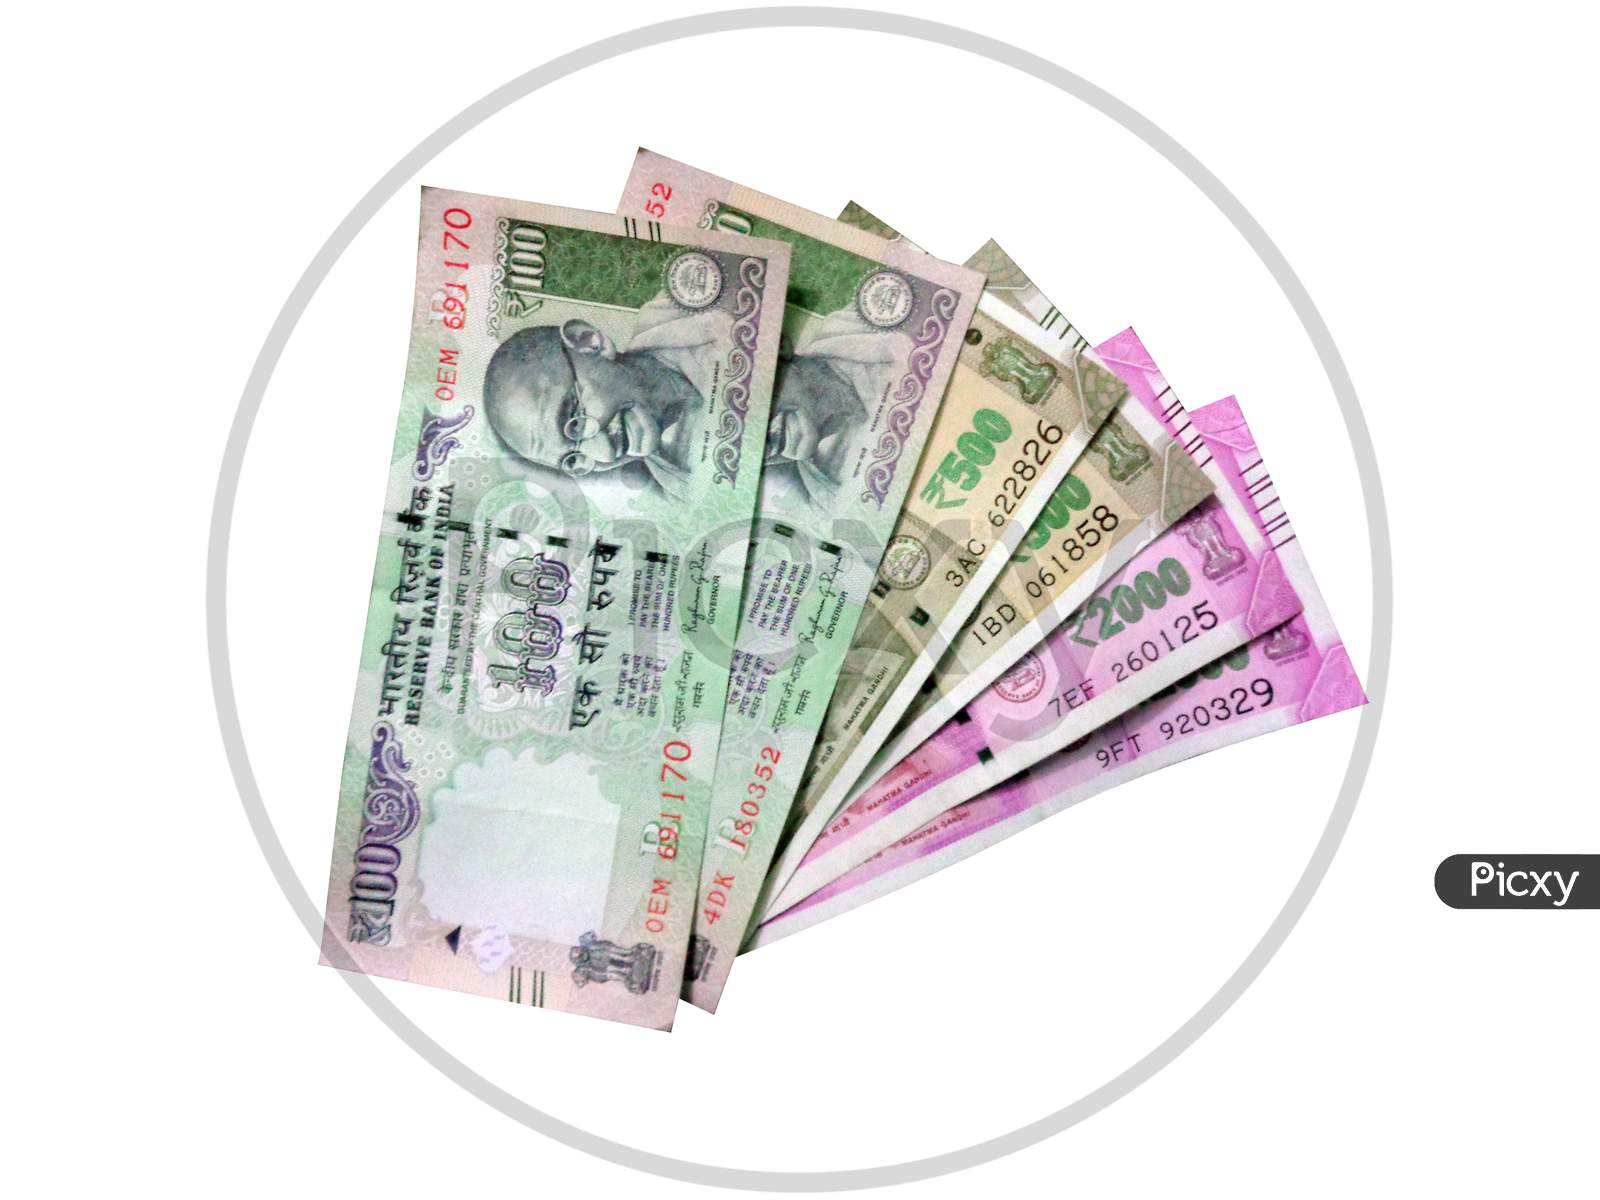 Two Thousand, Five Hundred And One Hundred New Indian Currency